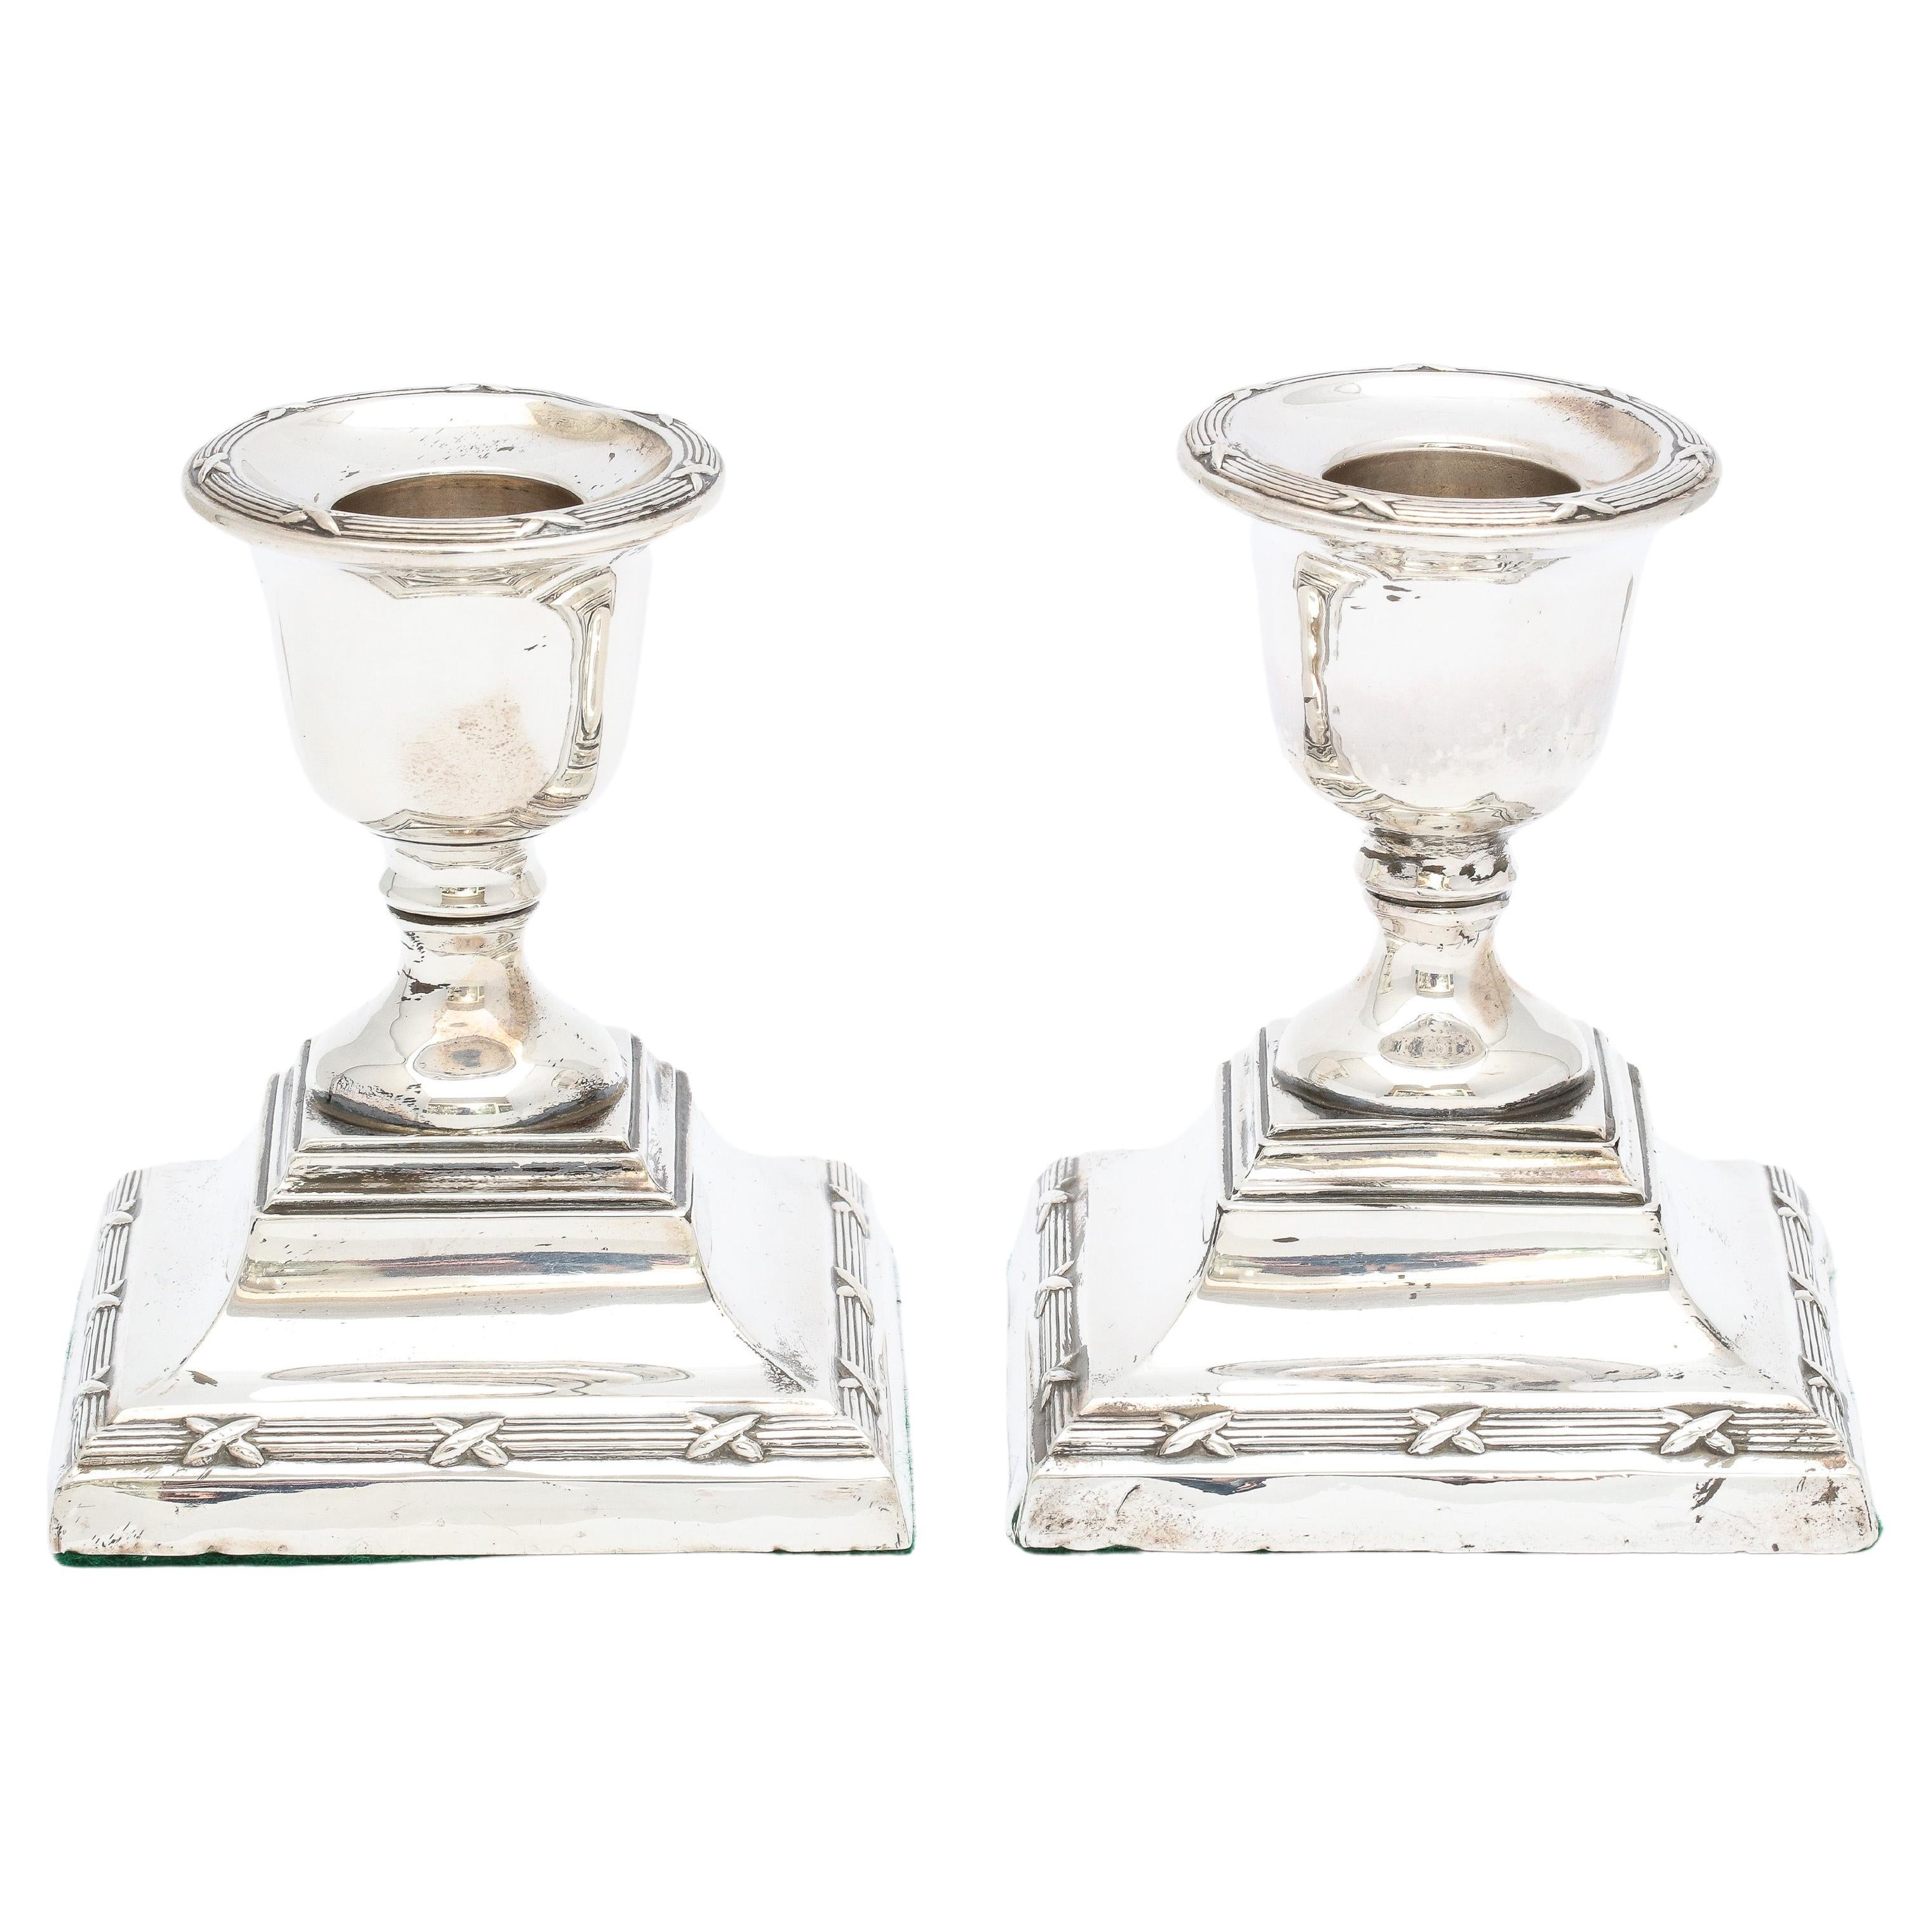 Pair of Edwardian Period Sterling Silver Adams-Style Candlesticks